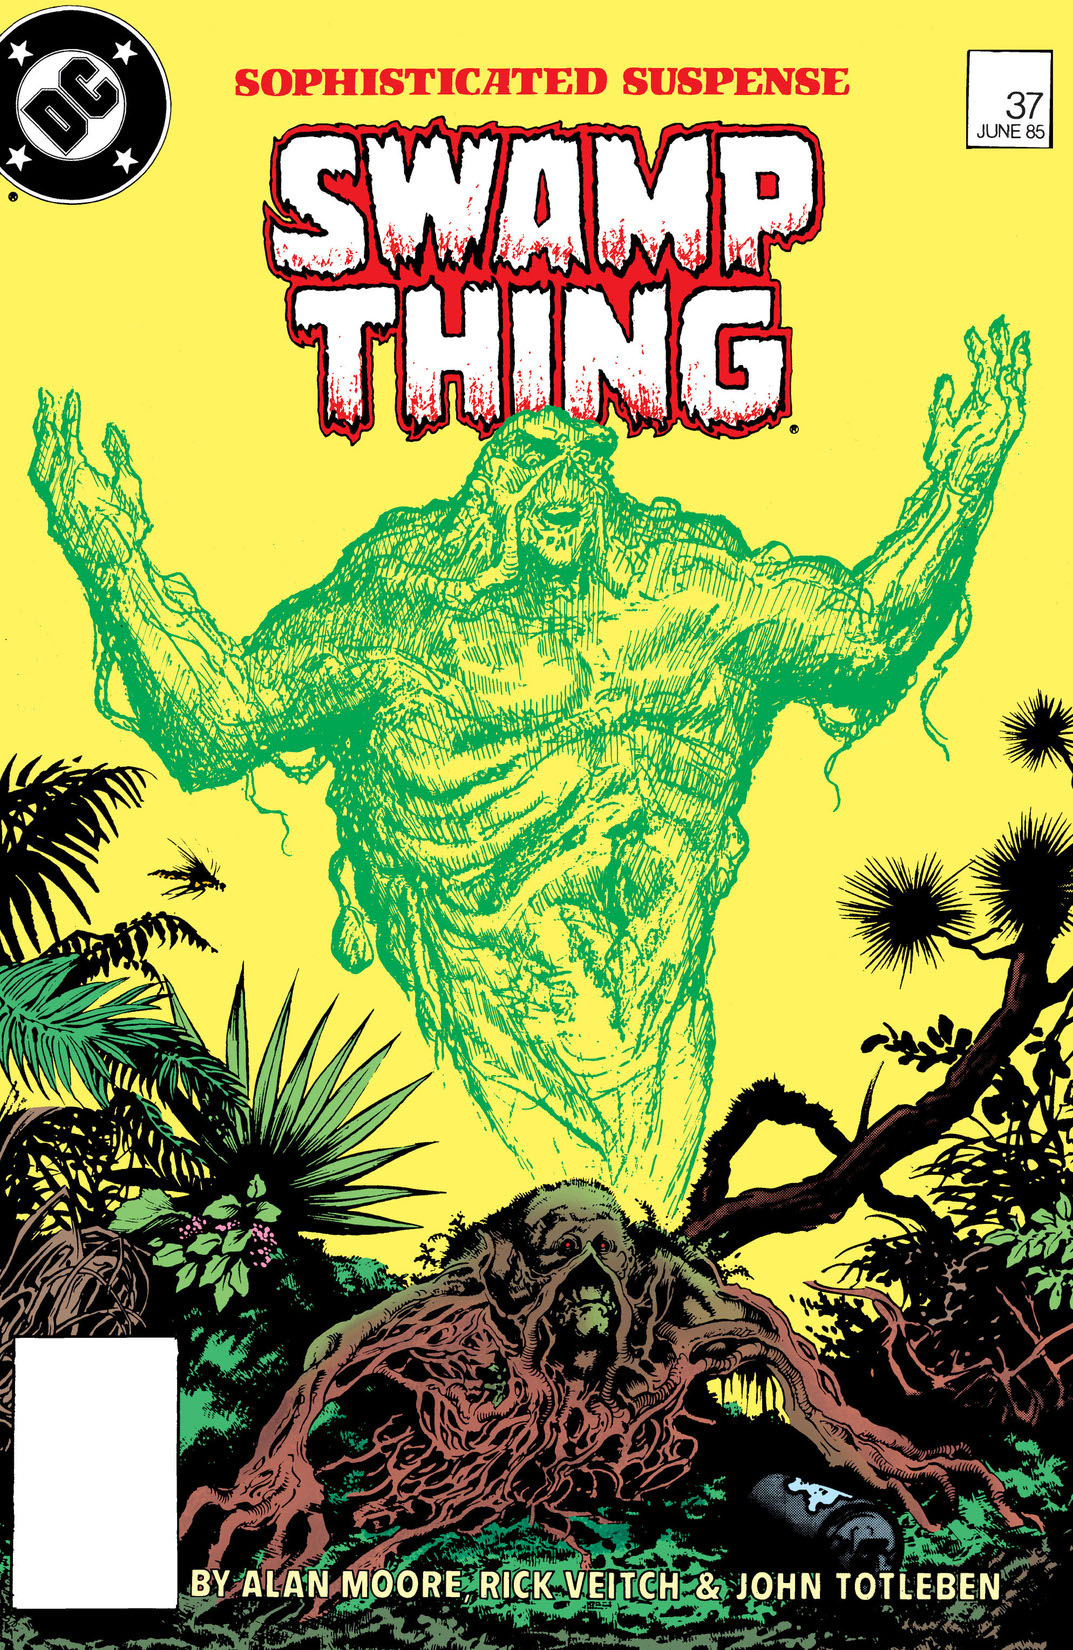 The Saga of the Swamp Thing (1982-) #37 preview images